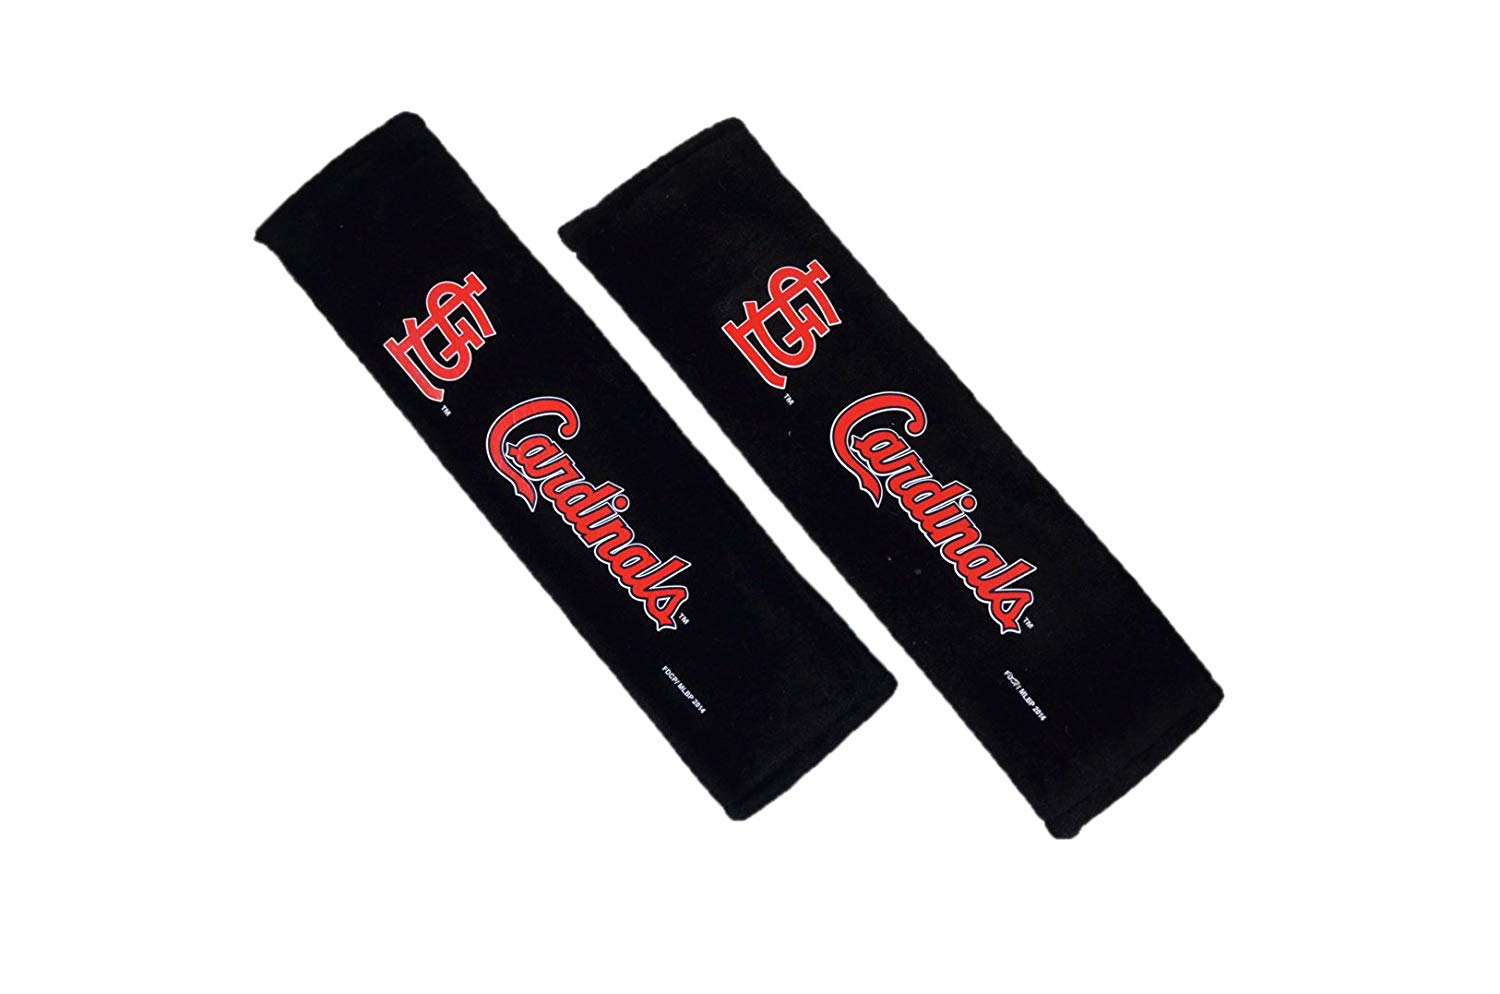 Official Major League Baseball MLB Fan Shop Authentic 2-pack Seat Belt/shoulder Strap Cover. Team Seatbelt Covers - Drive and Passenger or Duffle Bag Strap Cover